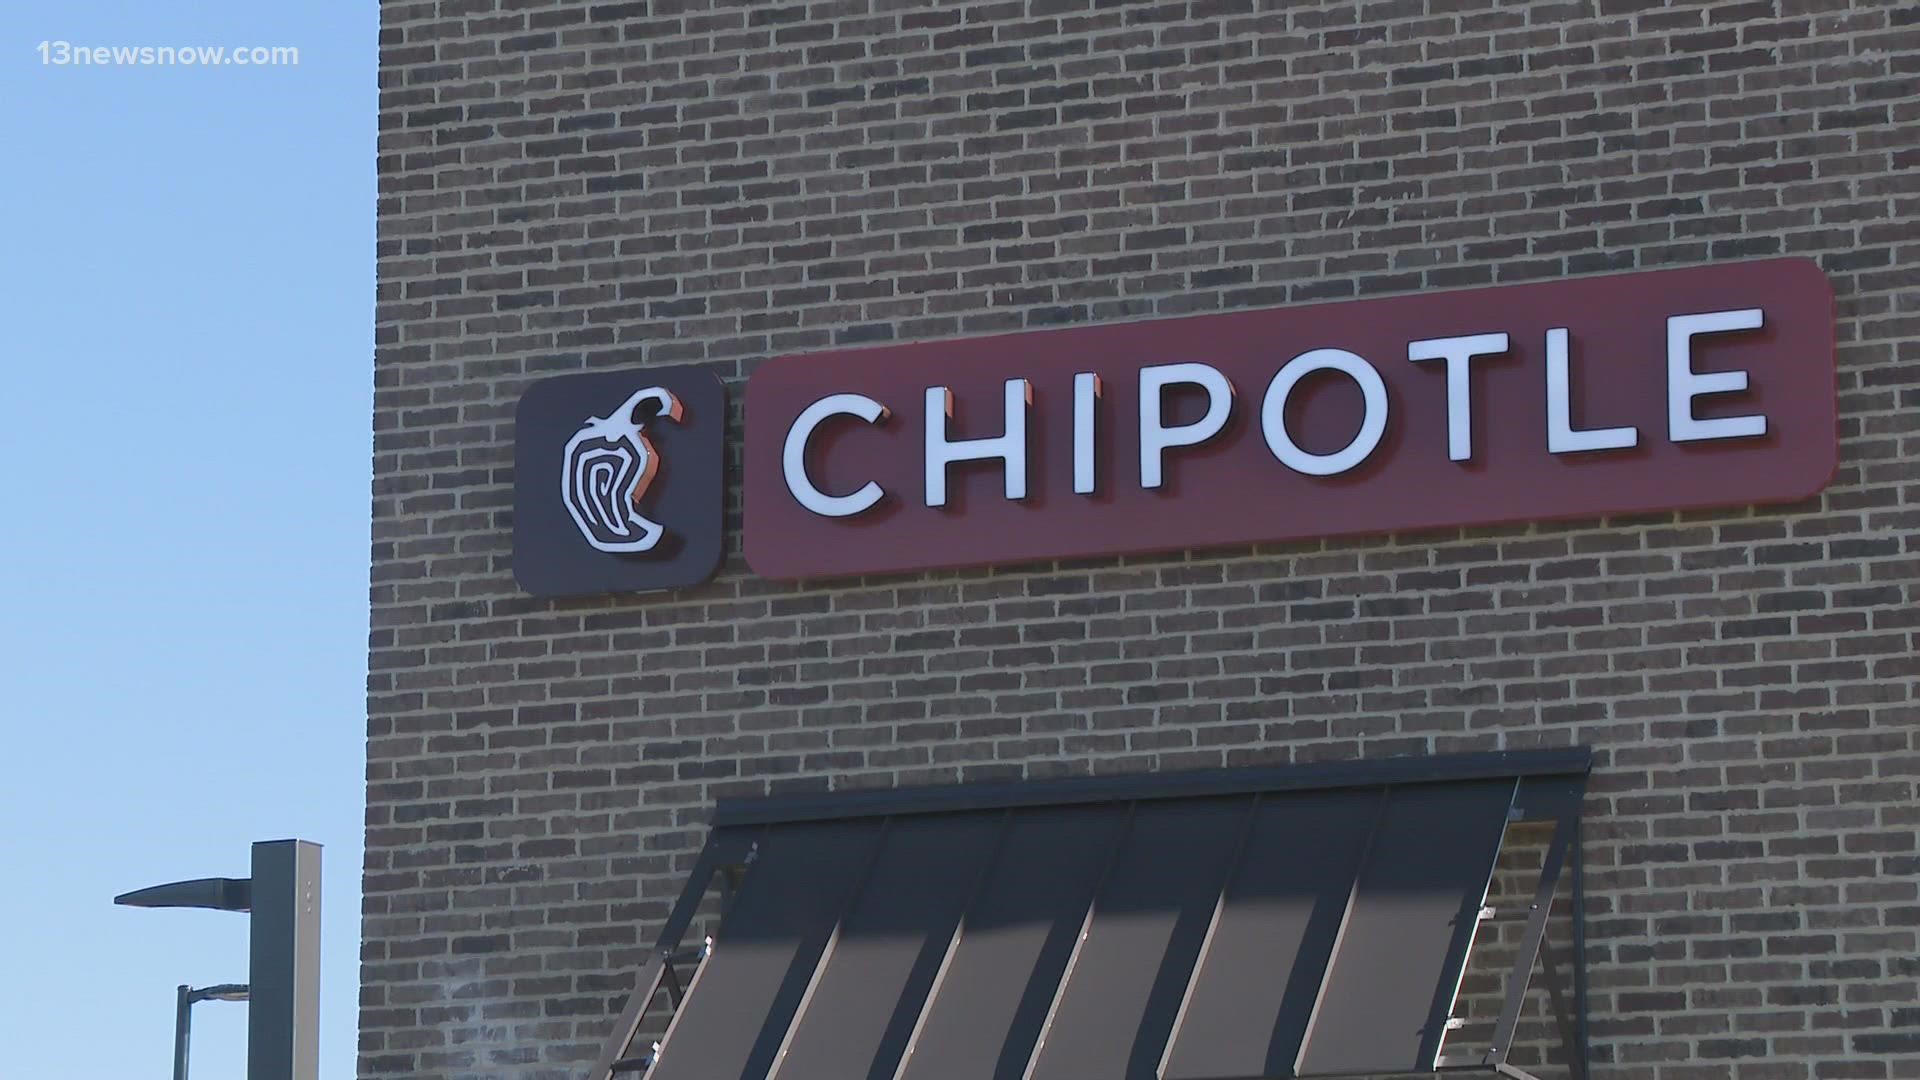 Gloucester residents were excited to get a Chipotle on their side of the river. The county has been getting more restaurant options in the last decade.